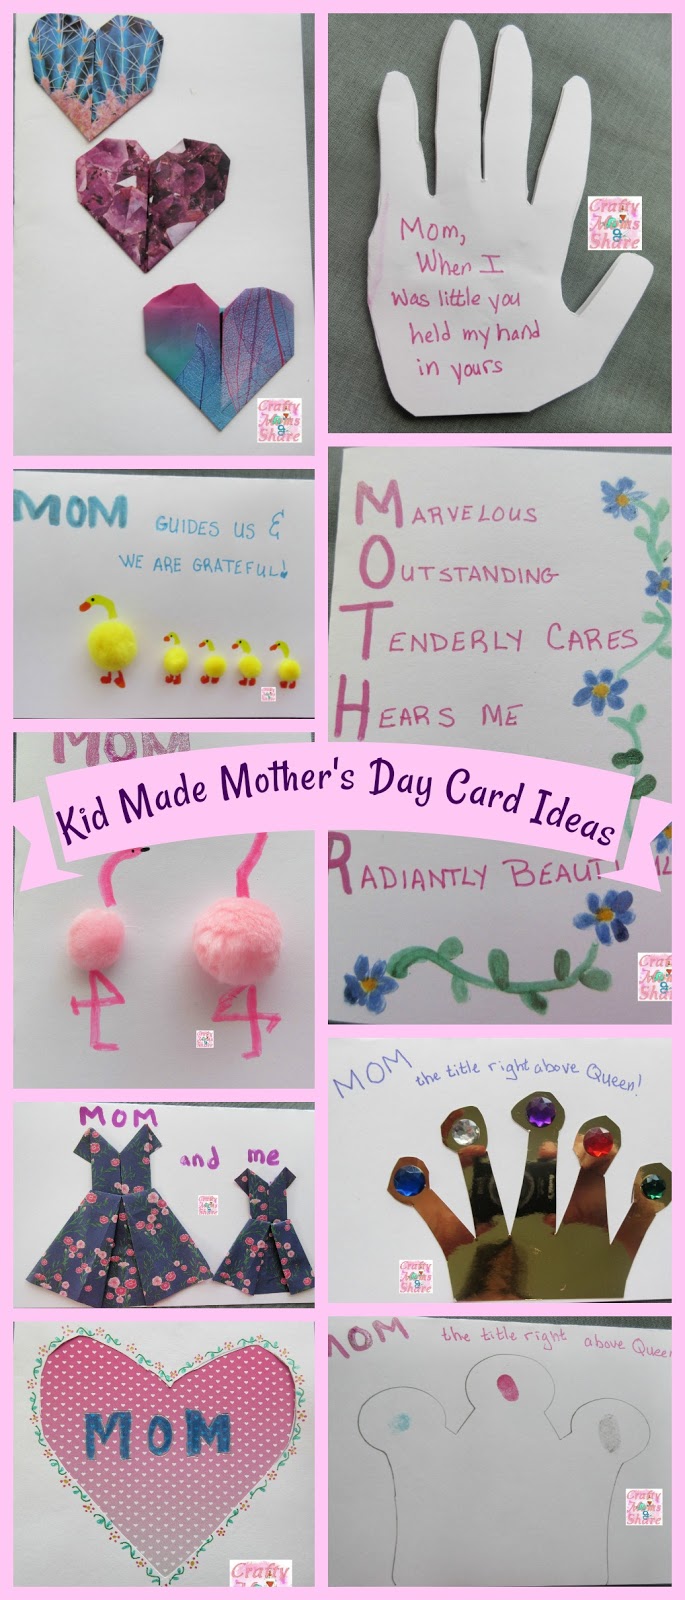 Crafty Moms Share: Kid Made Mother's Day Card Ideas with Round-Up